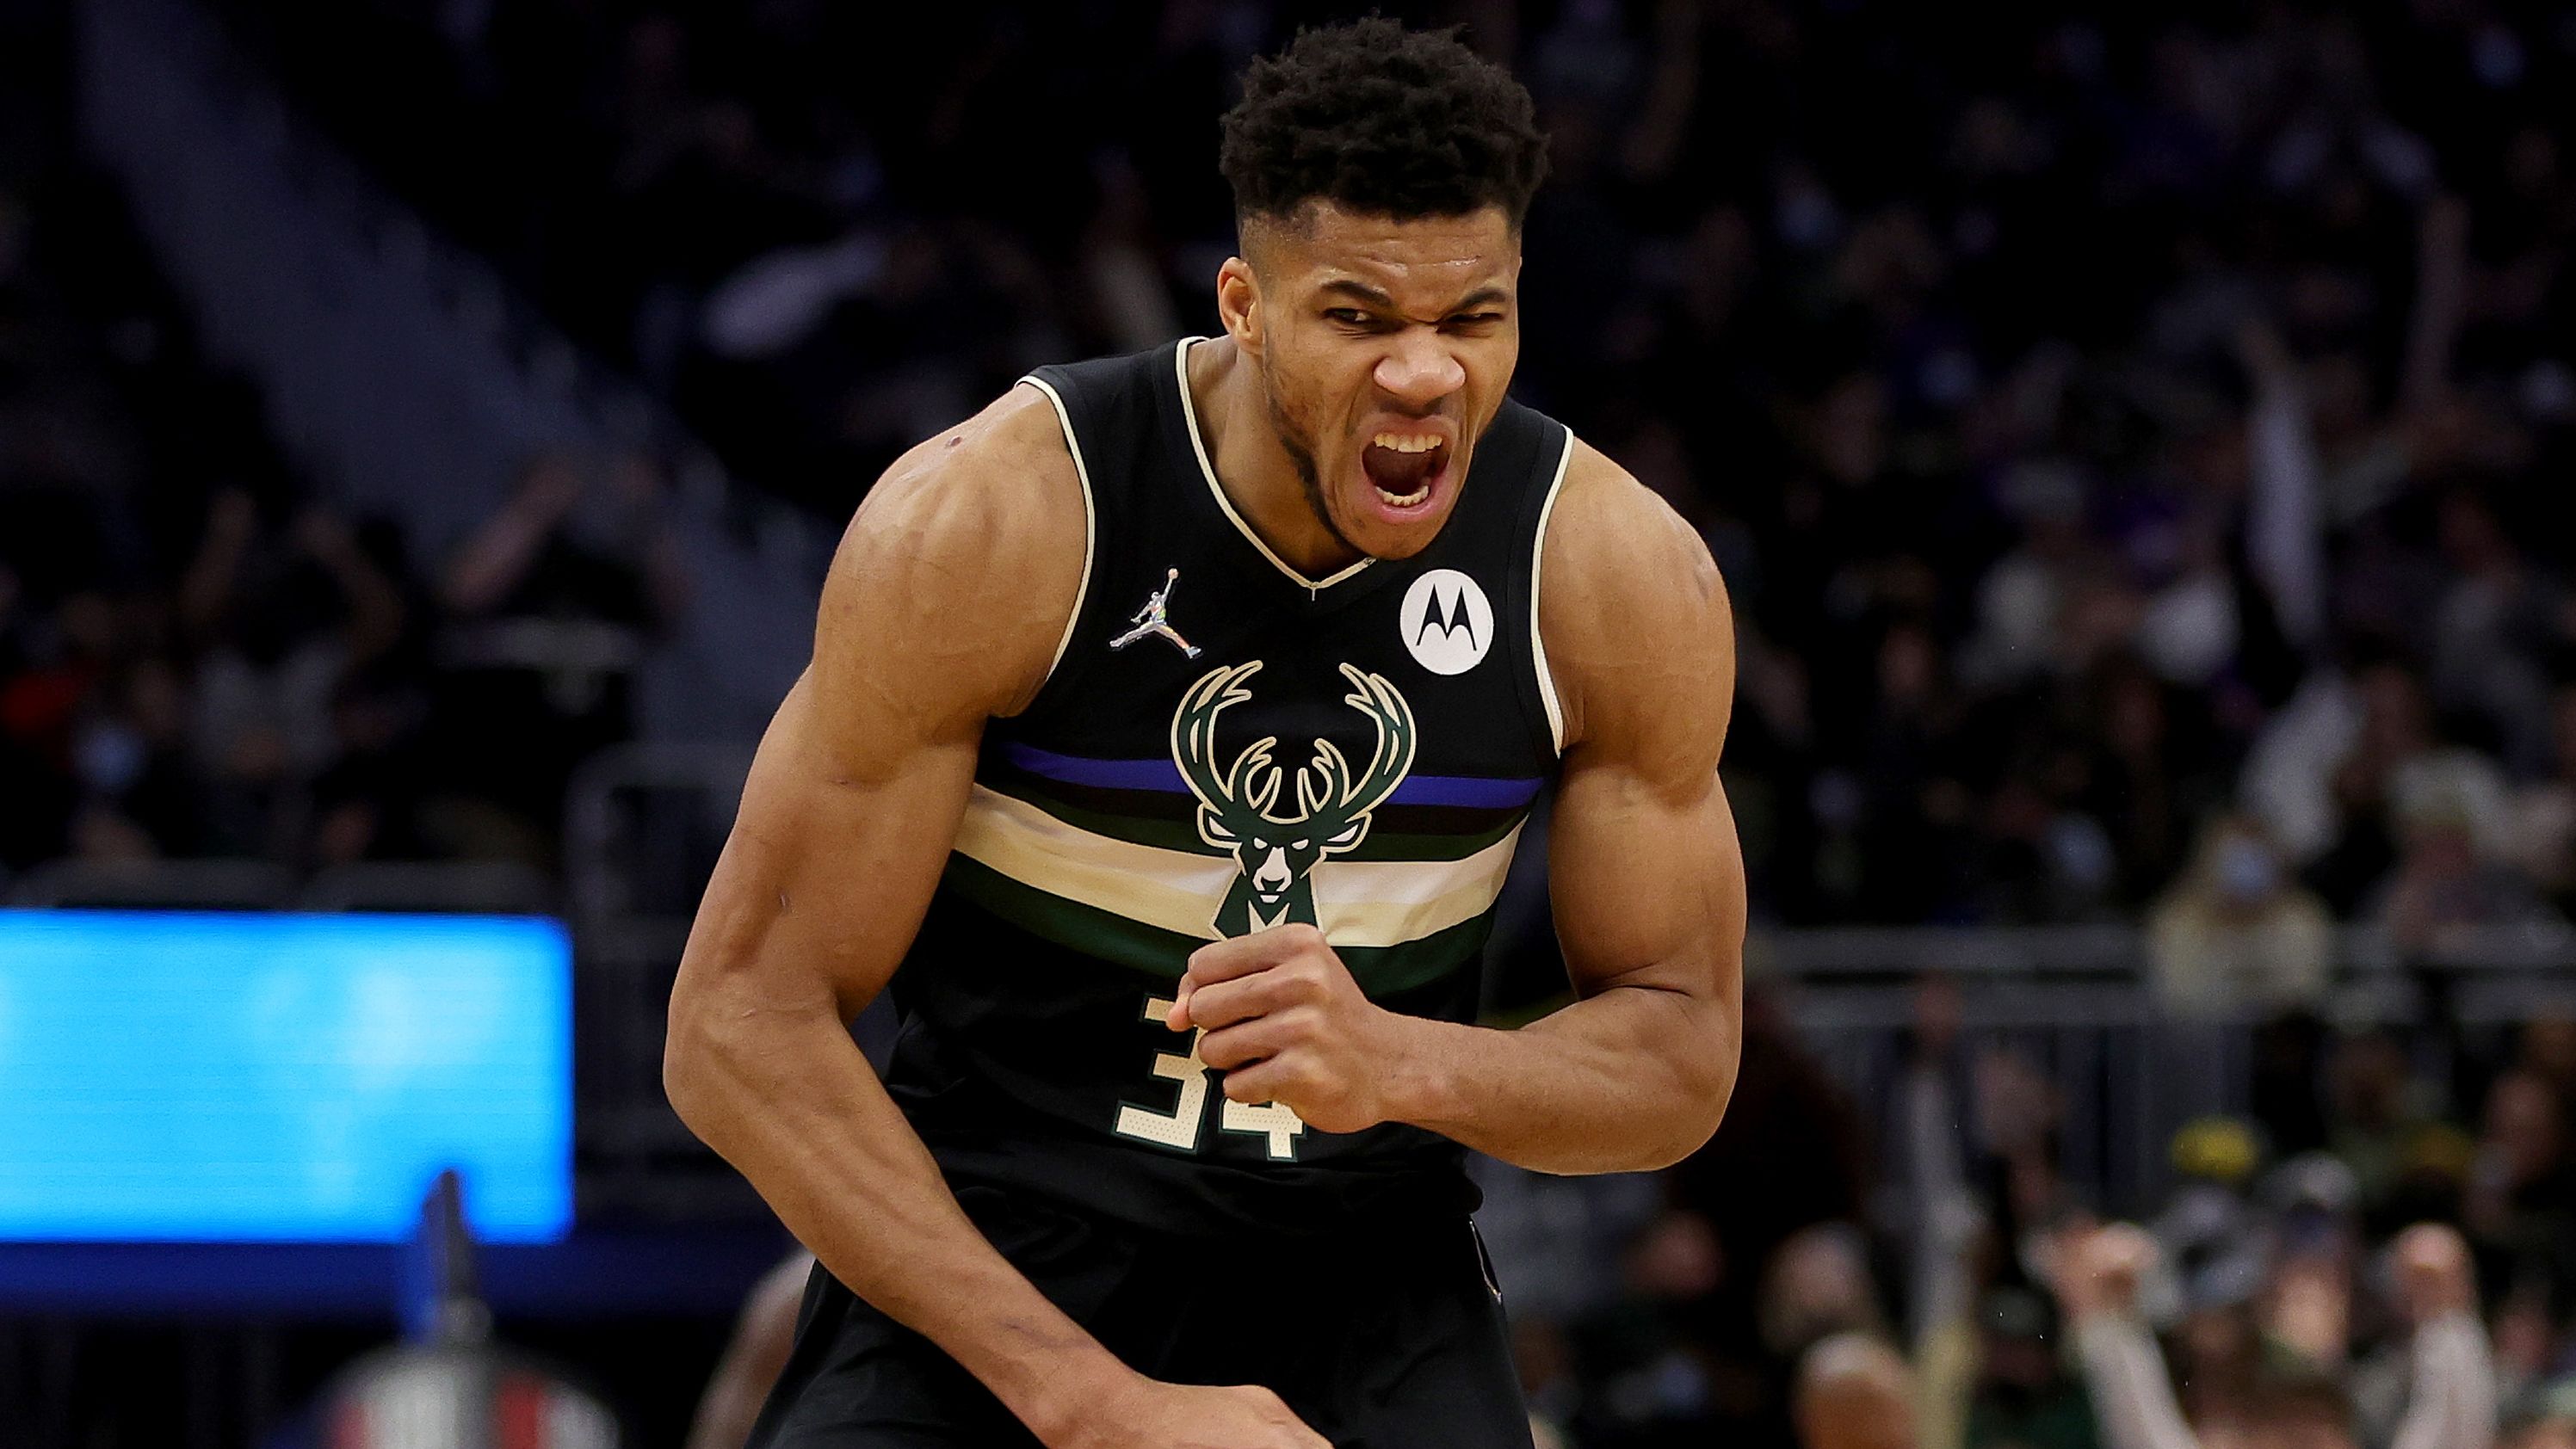 Antetokounmpo reacts to a three-point shot against the New York Knicks. 